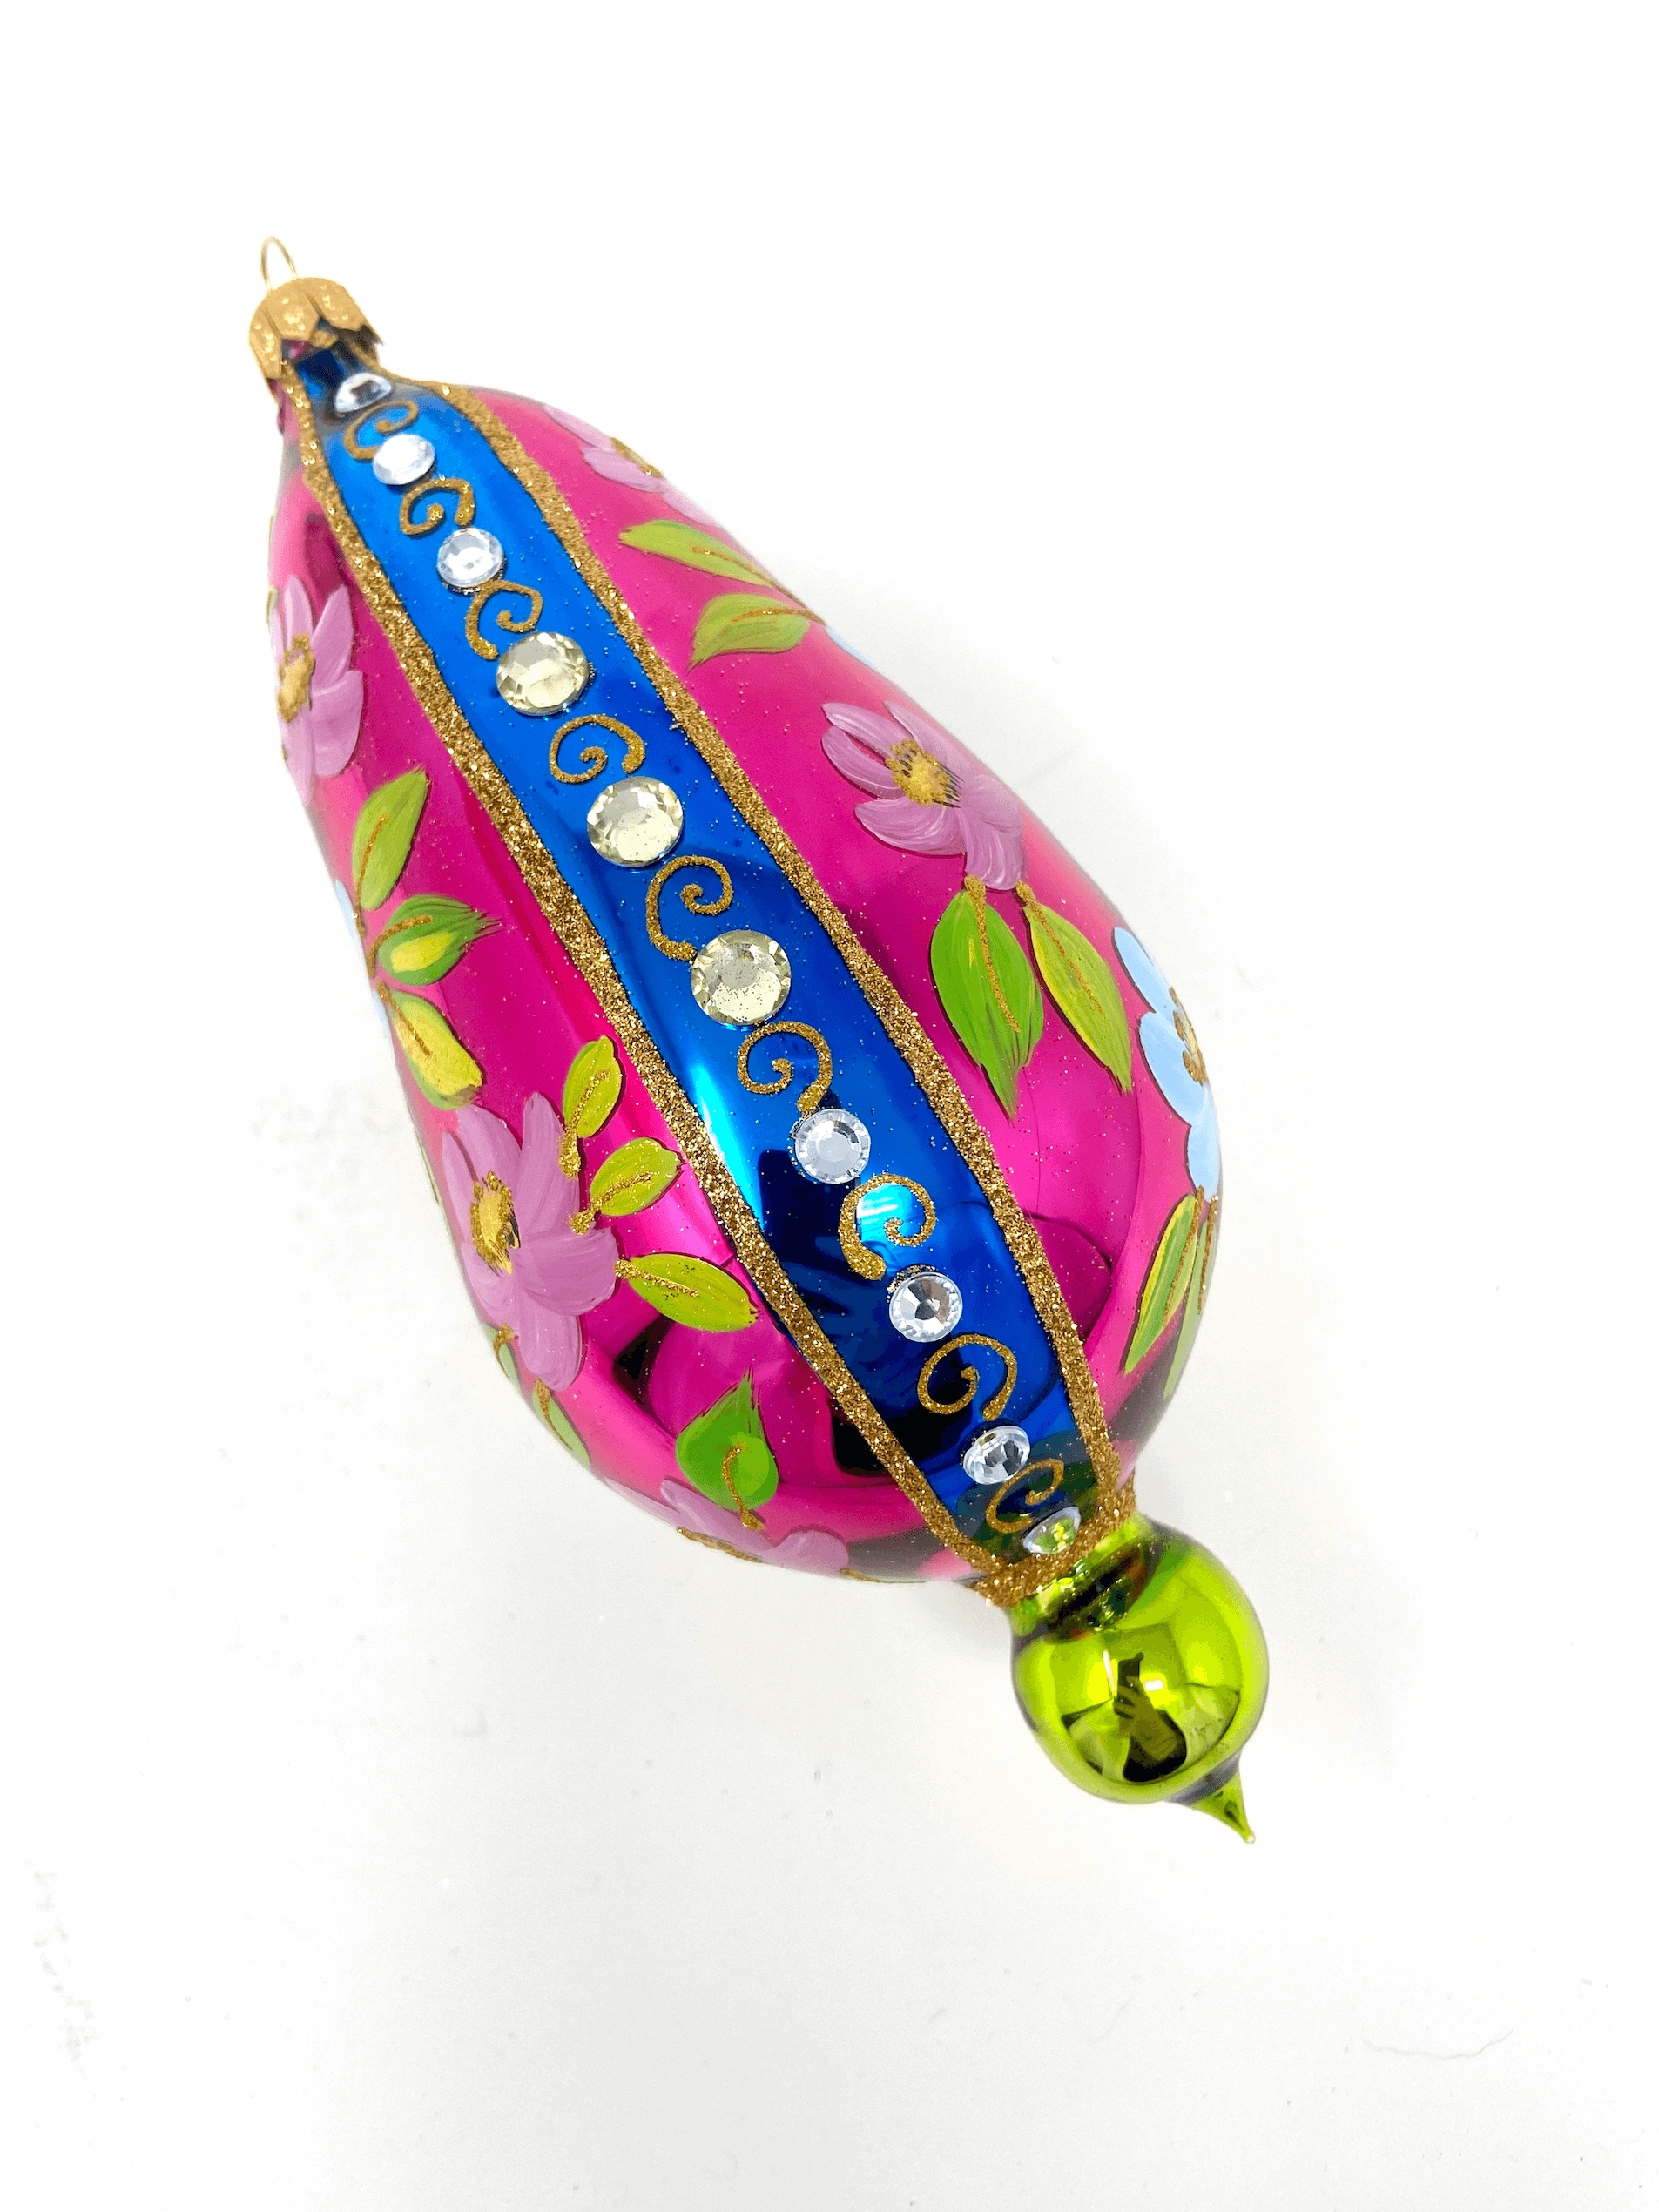 Pink eggplant shaped ornament featuring gemstones, intricate gold detailing, and hand painted floral blooms. A Christmas polish glass ornament. Floral Escape Floral Fetish.